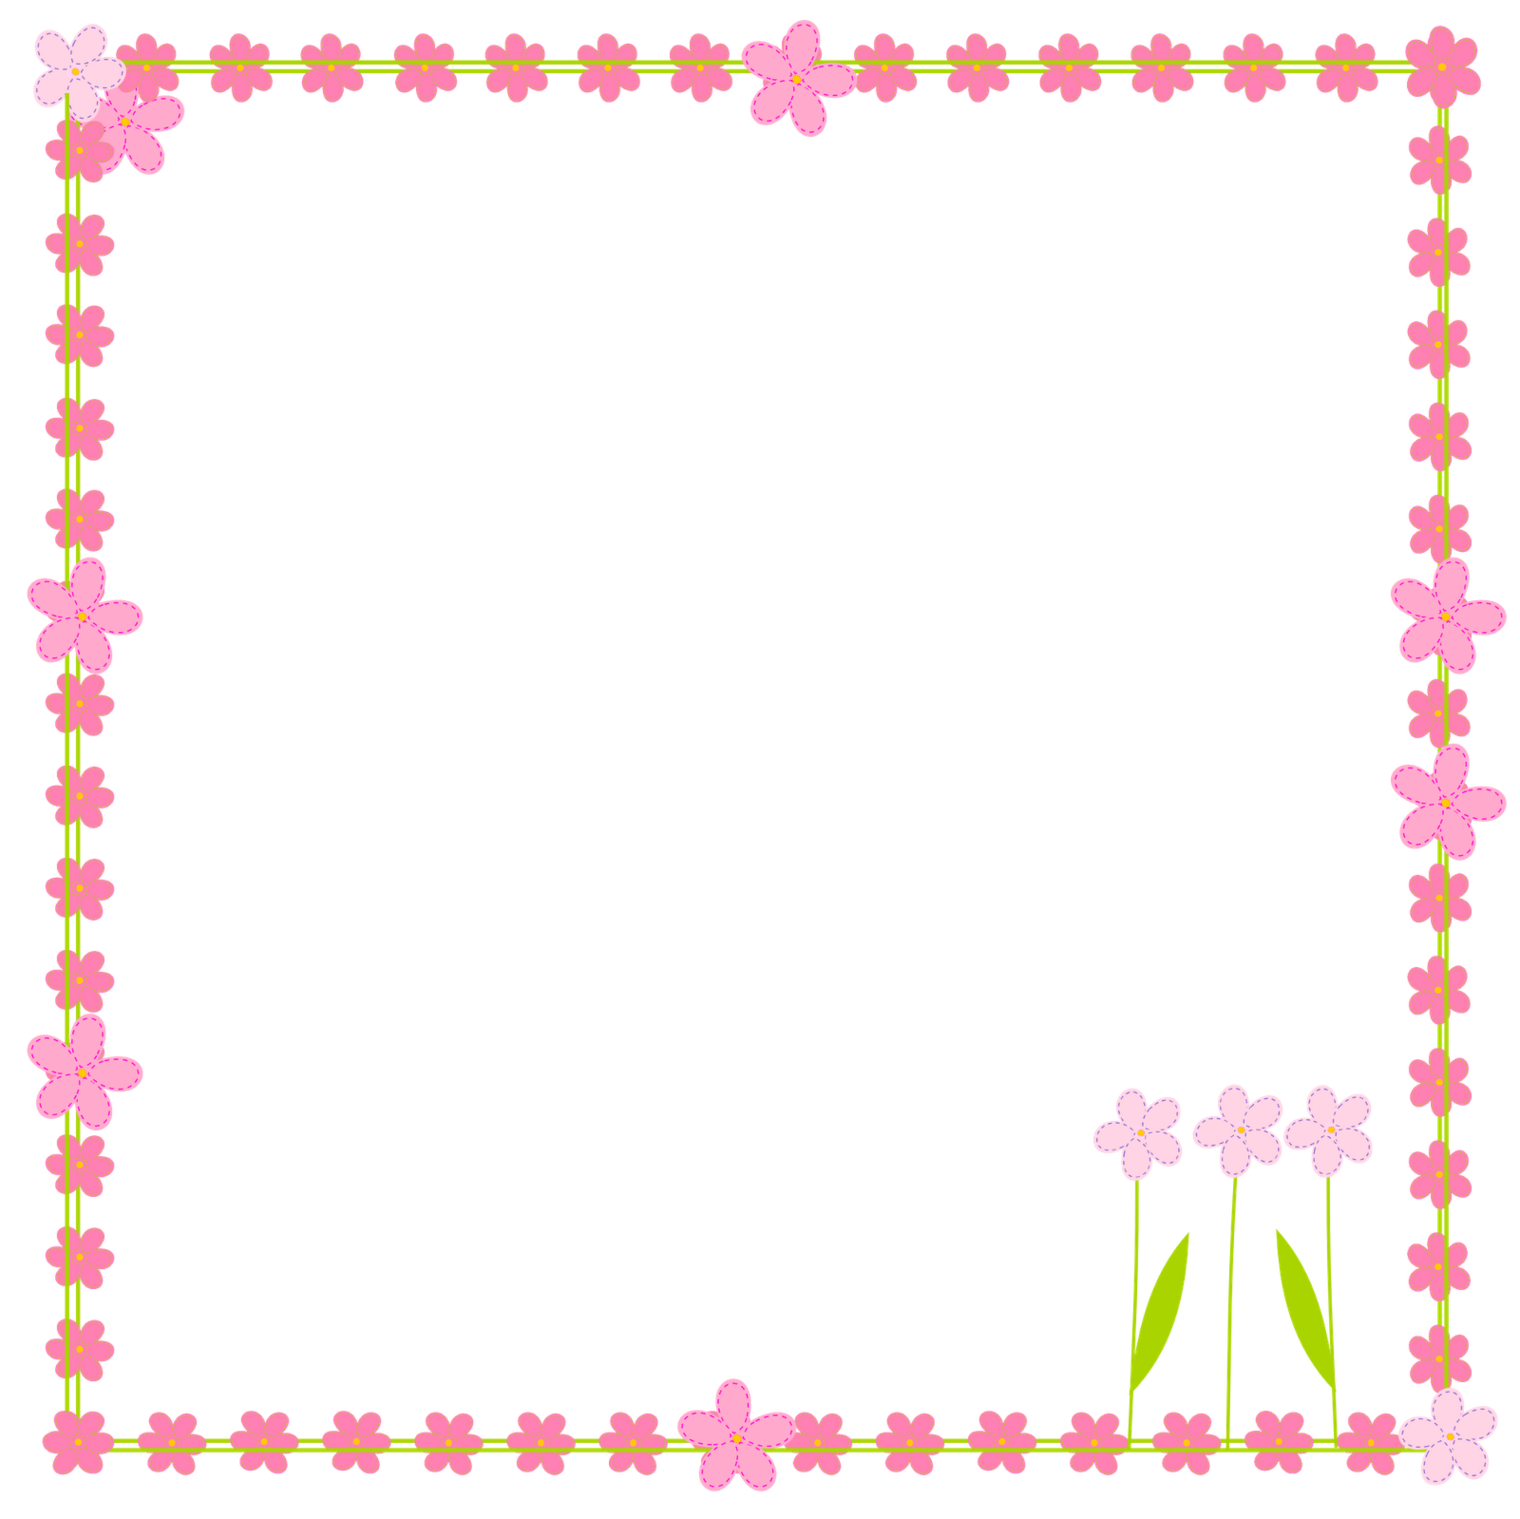 clipart floral background - photo #18